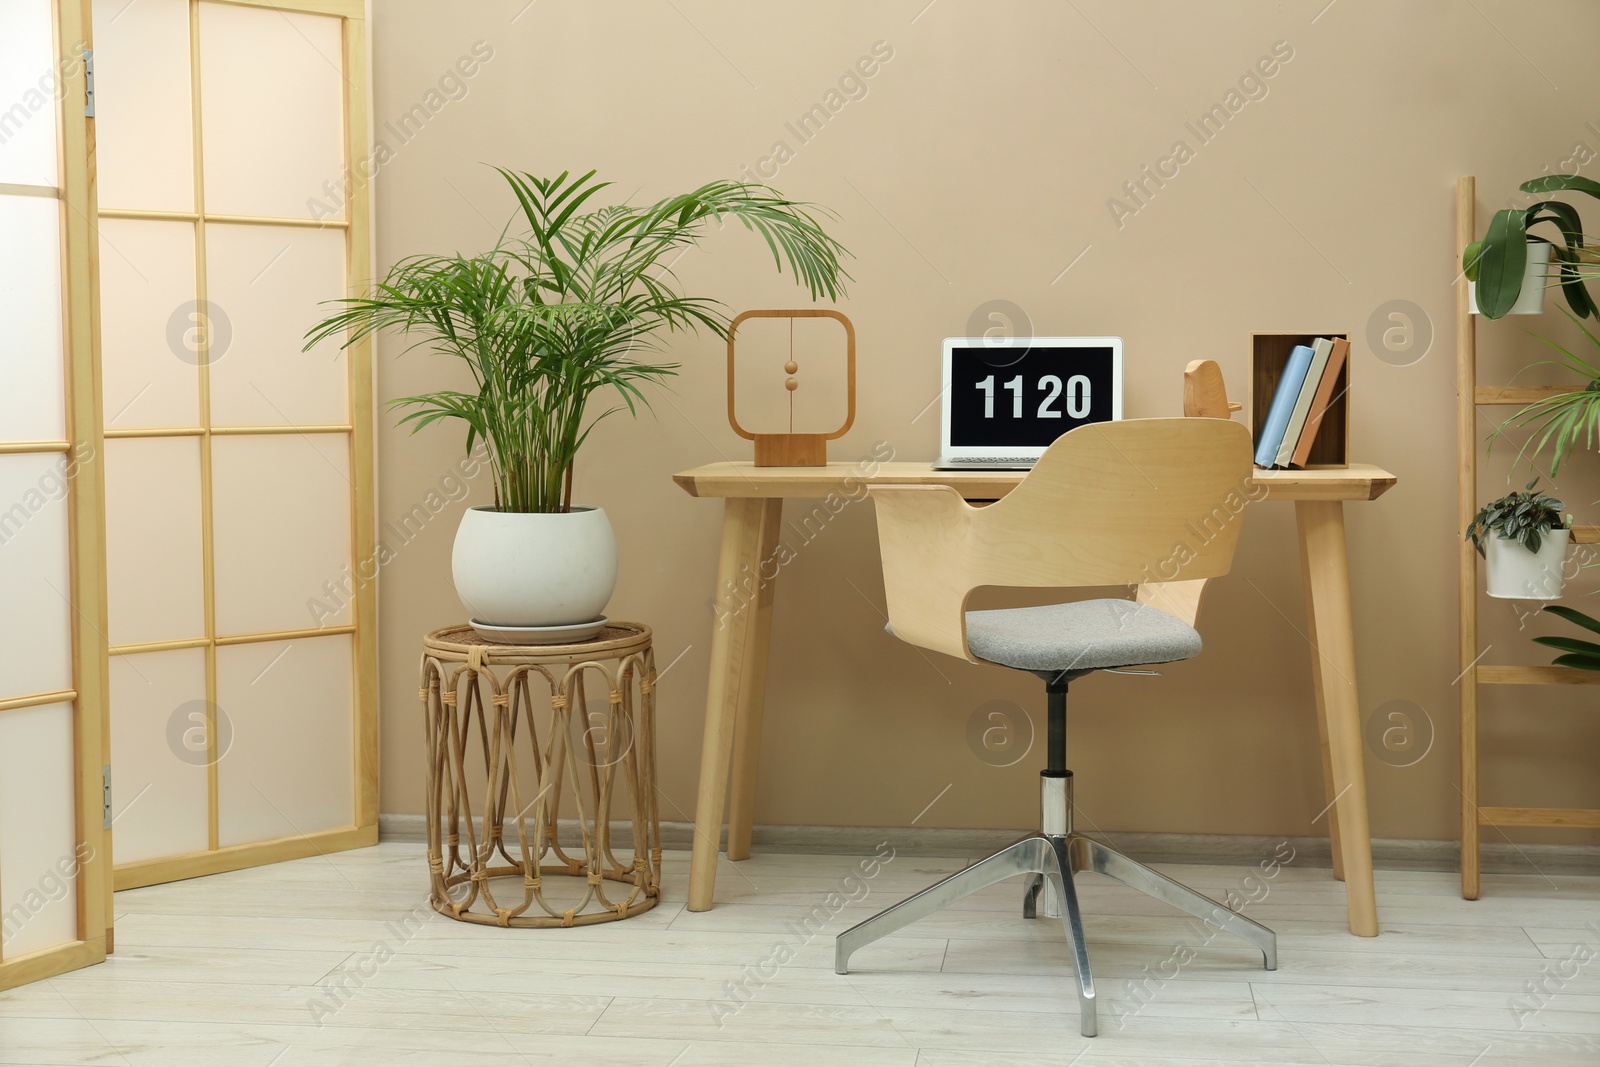 Photo of Stylish workplace with laptop, armchair and houseplants in room. Interior design